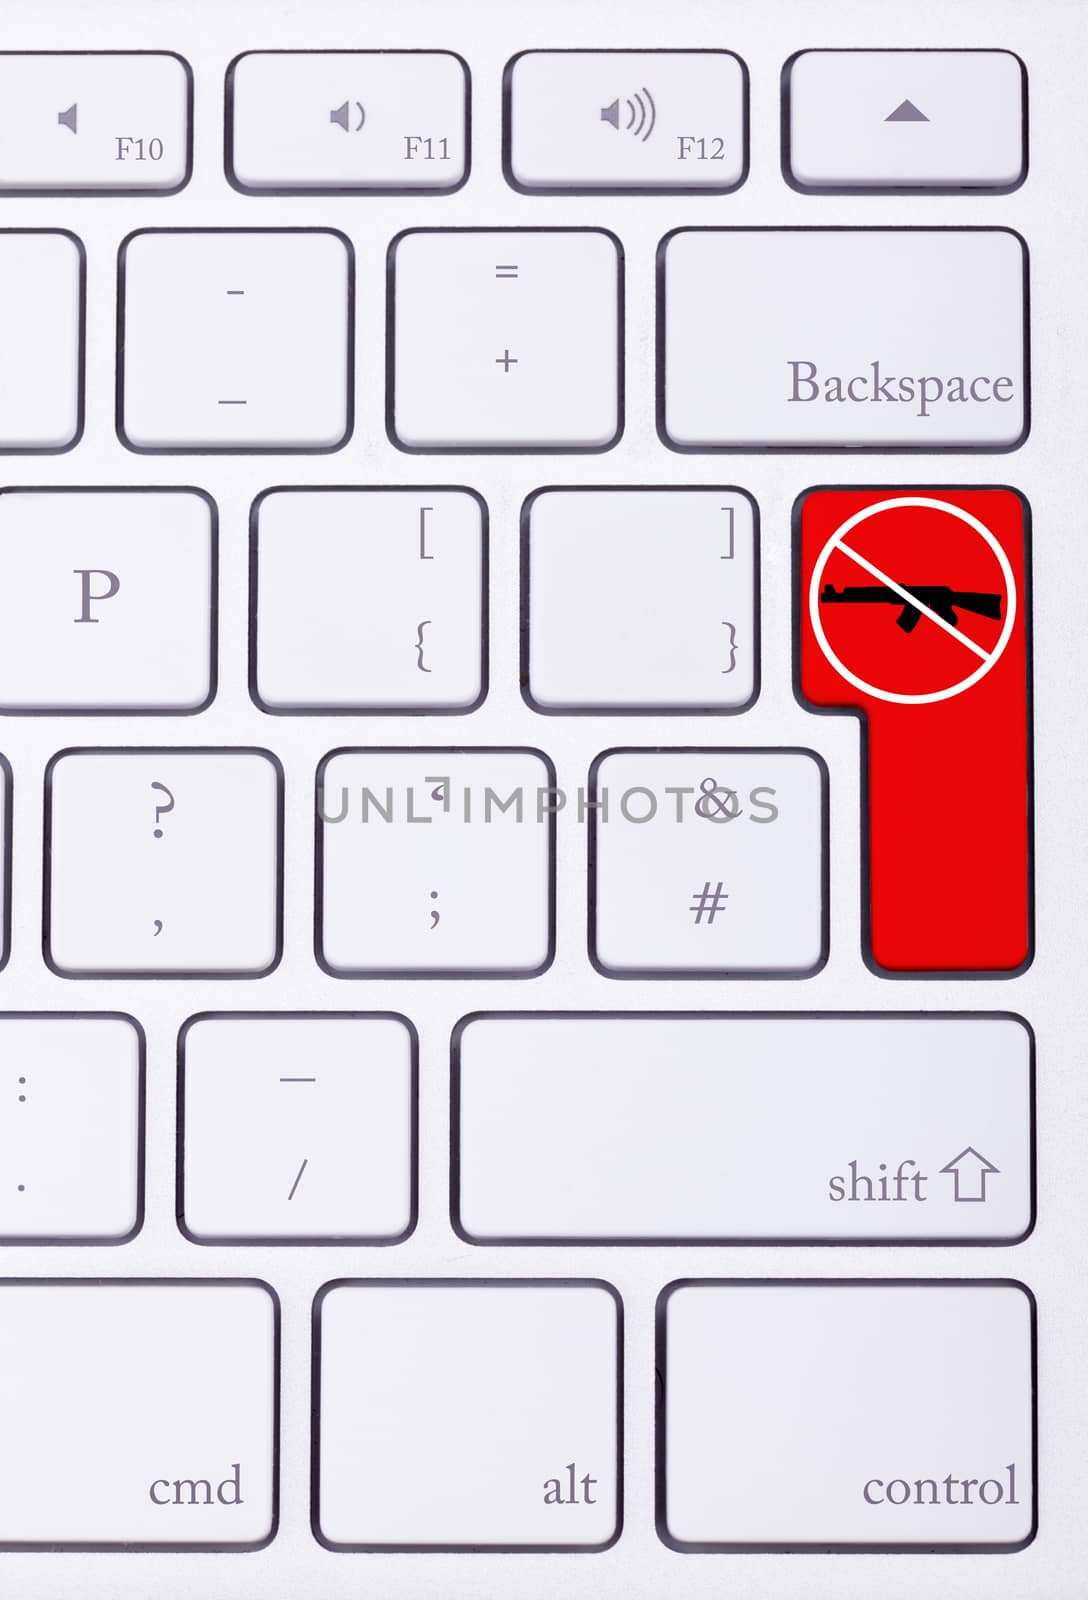 Red button on keyboard with stop guns and war sign. Criminal attack